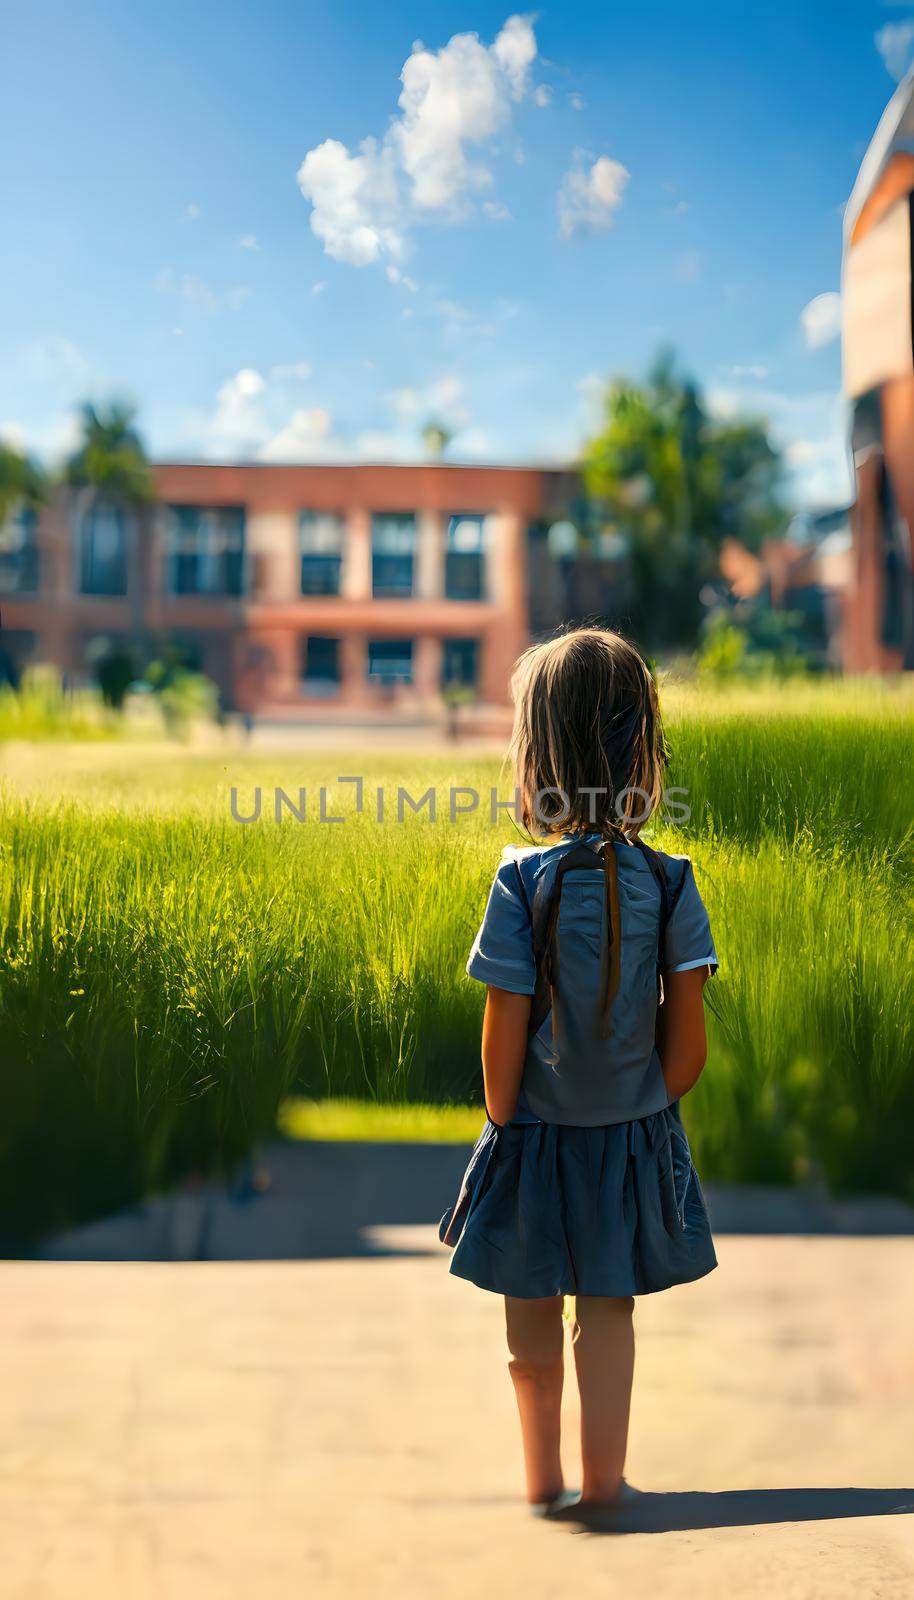 Back facing little girl with backpack looking at school building at sunny summer day, neural network generated image. by z1b